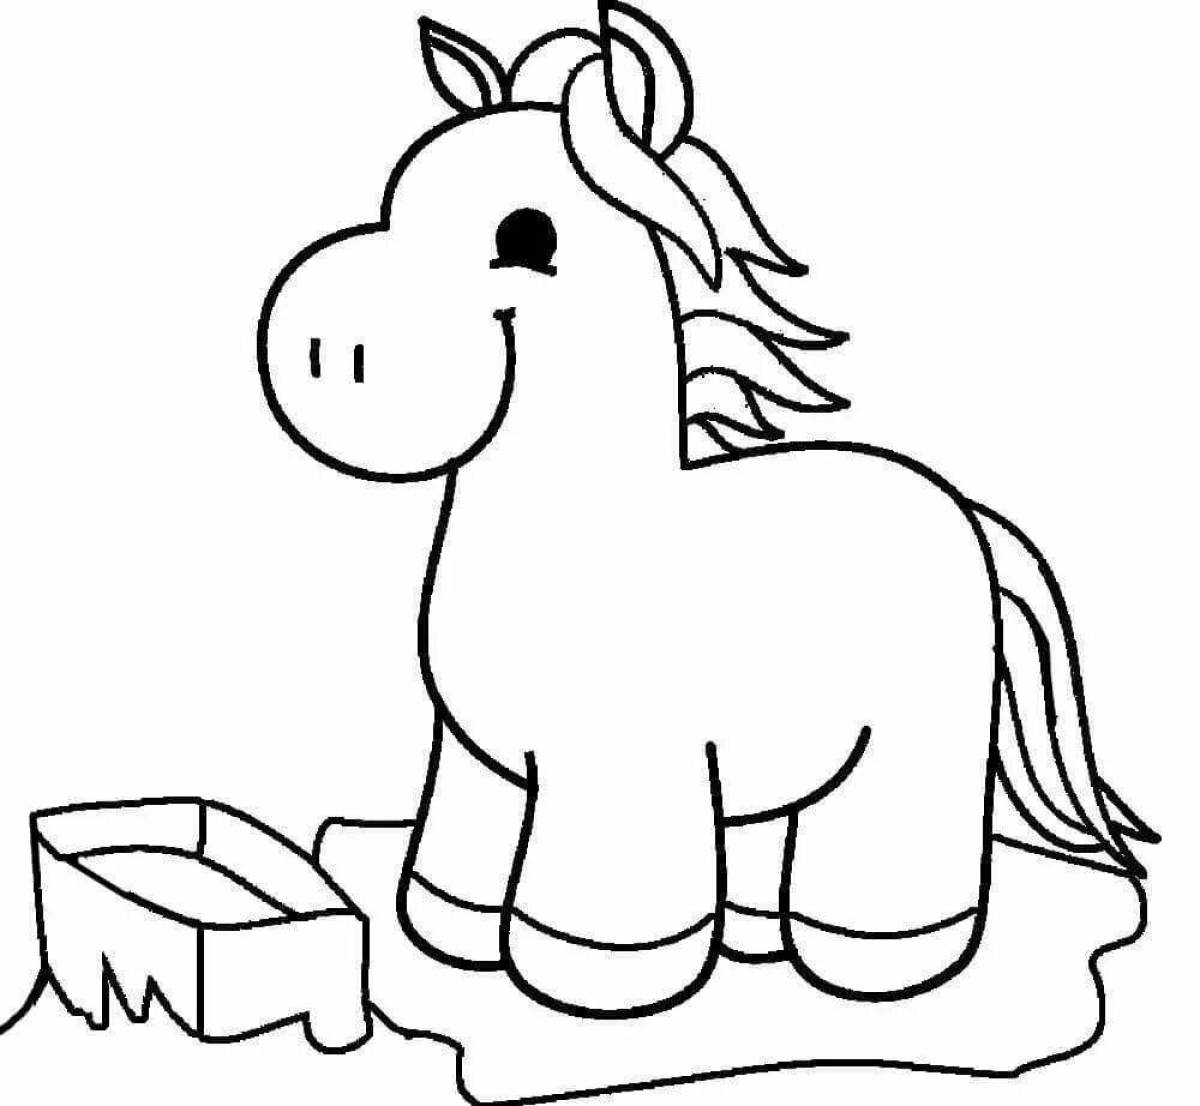 Elegant horse coloring book for children 4-5 years old